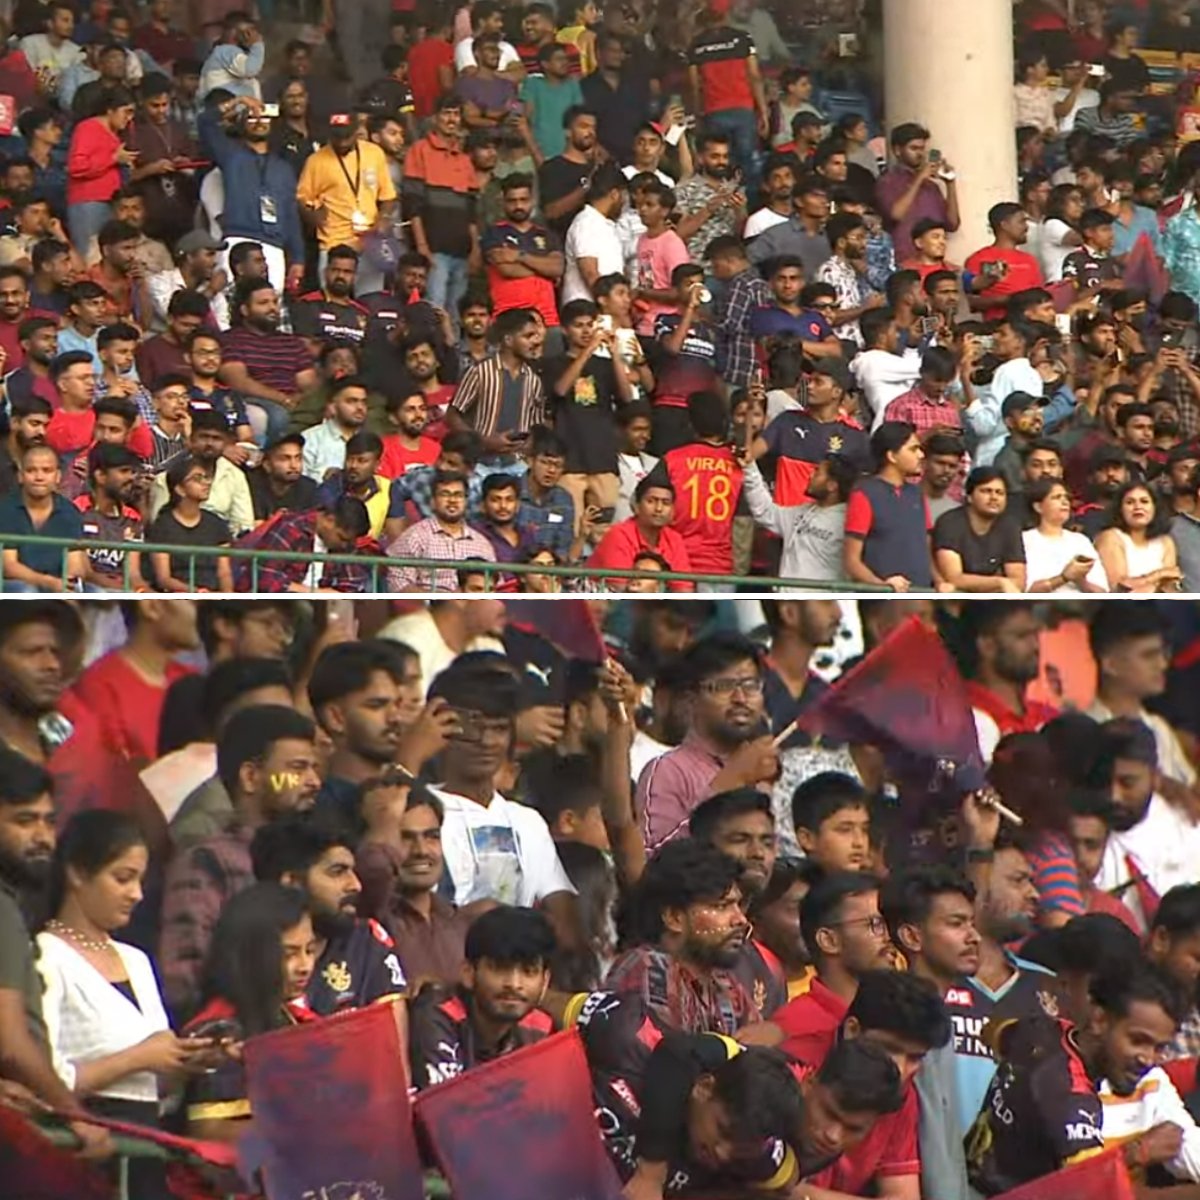 #RCBUnbox has more buzz and fans than the PSL final 

And they are talking about the best league in the world 

Levels 😂😂😂 #TATAIPL #TATAWPL #HBLPSL8 #TATAWPLFINAL